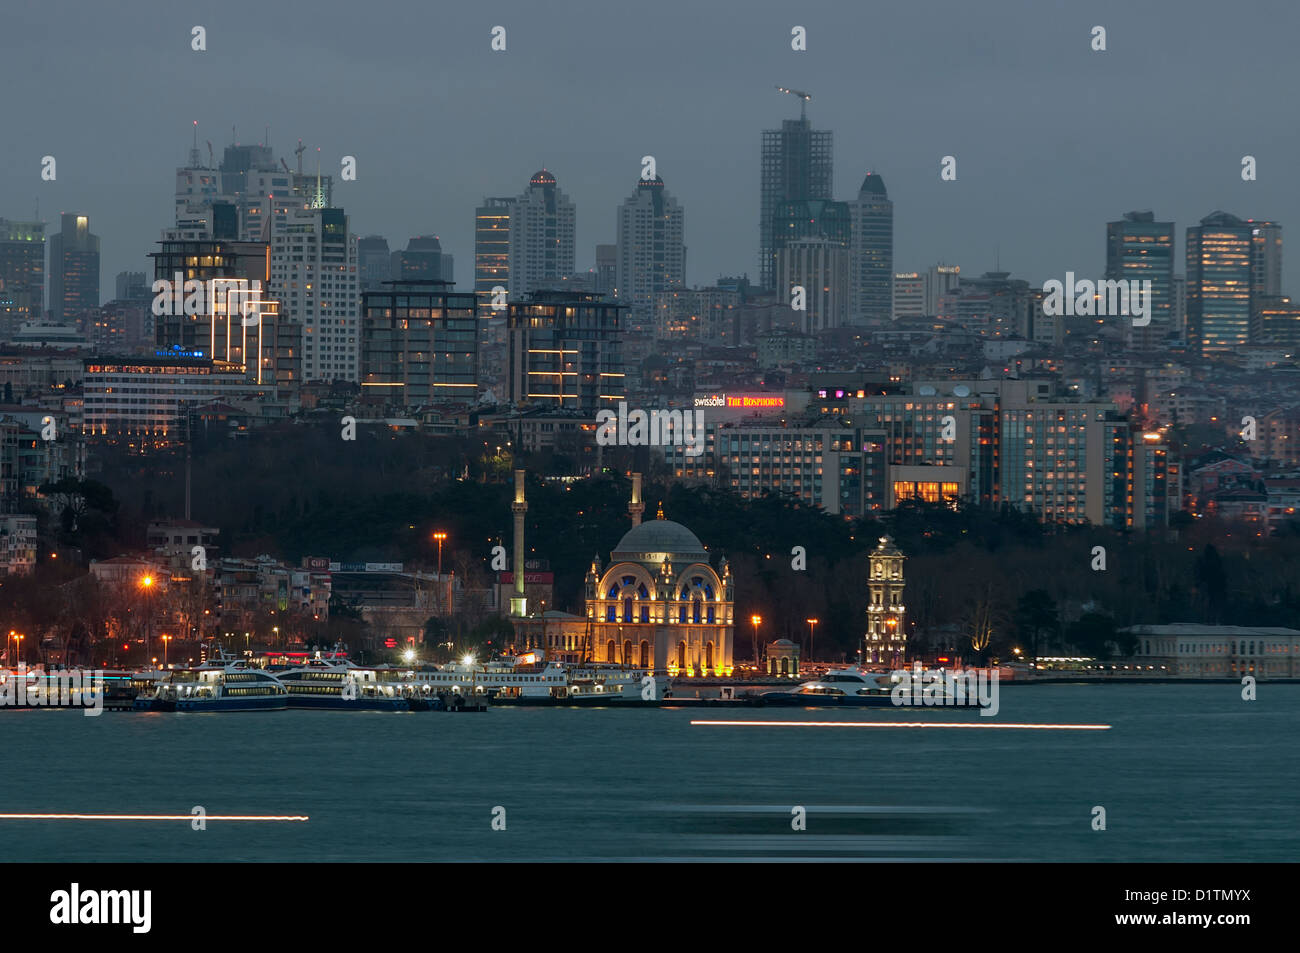 Dolmabahce Mosque and Clock Tower,Skylines in the backround,istanbul,Turkey Stock Photo